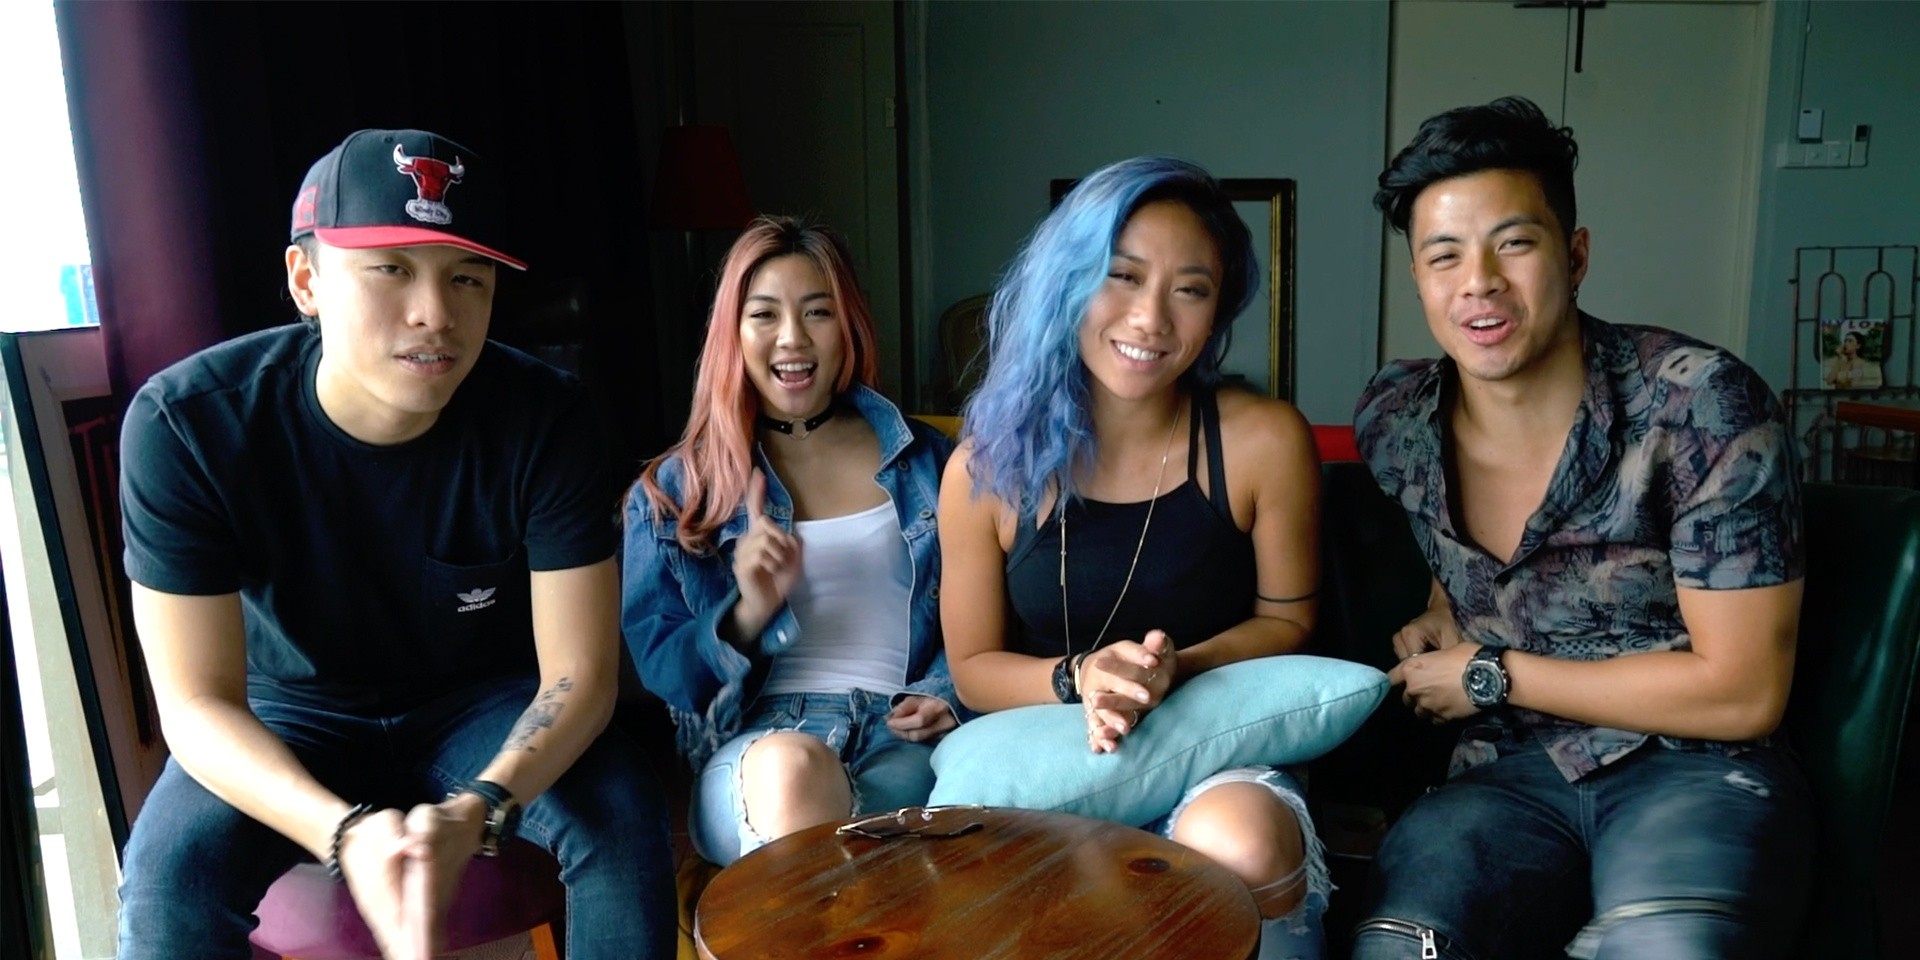 The Sam Willows talk their new album, facing criticism and how they've grown as a band – watch